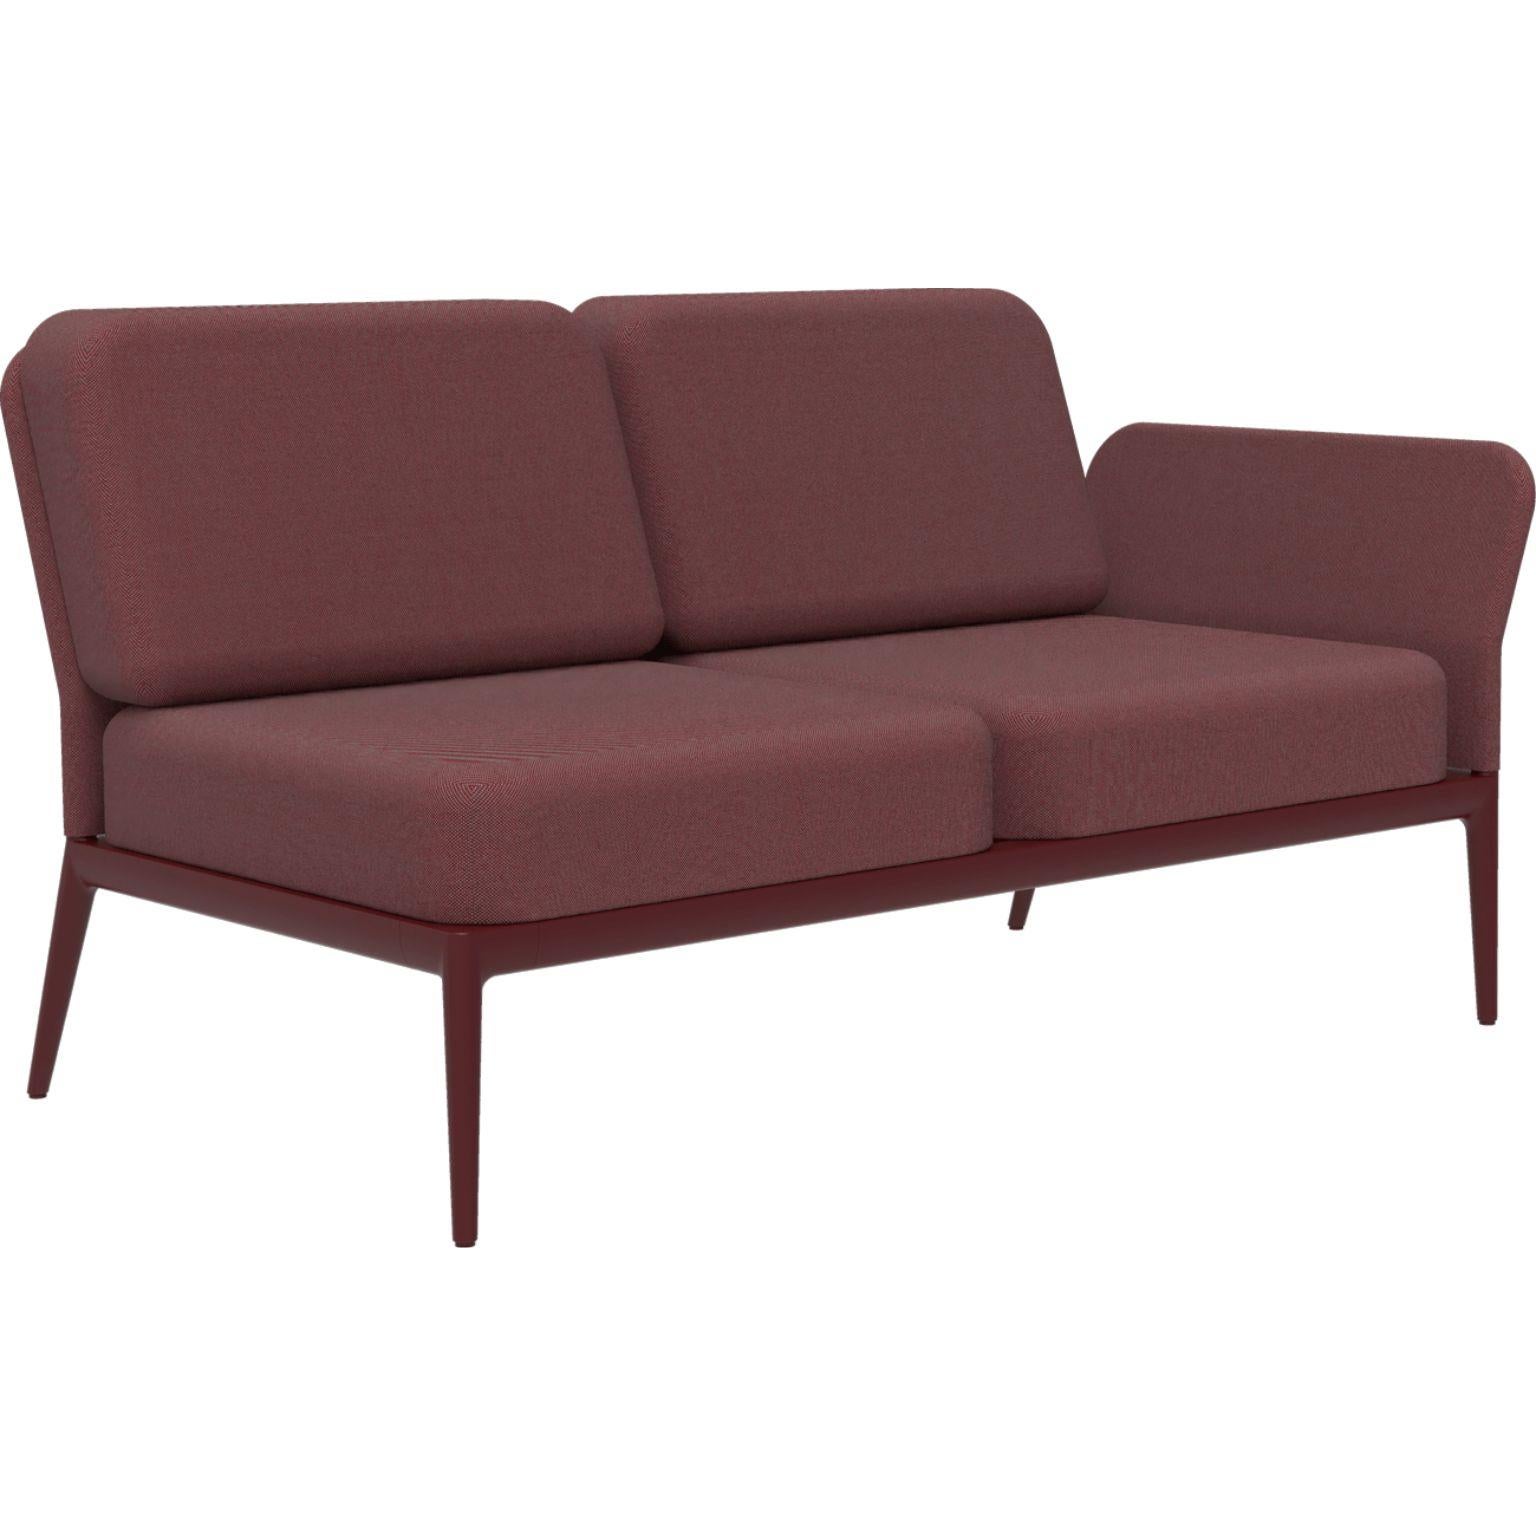 Cover Burgundy Double Left Modular Sofa by MOWEE
Dimensions: D83 x W148 x H81 cm (seat height 42 cm)
Material: Aluminum and upholstery.
Weight: 29 kg.
Also available in different colors and finishes. Please contact us.

An unmistakable